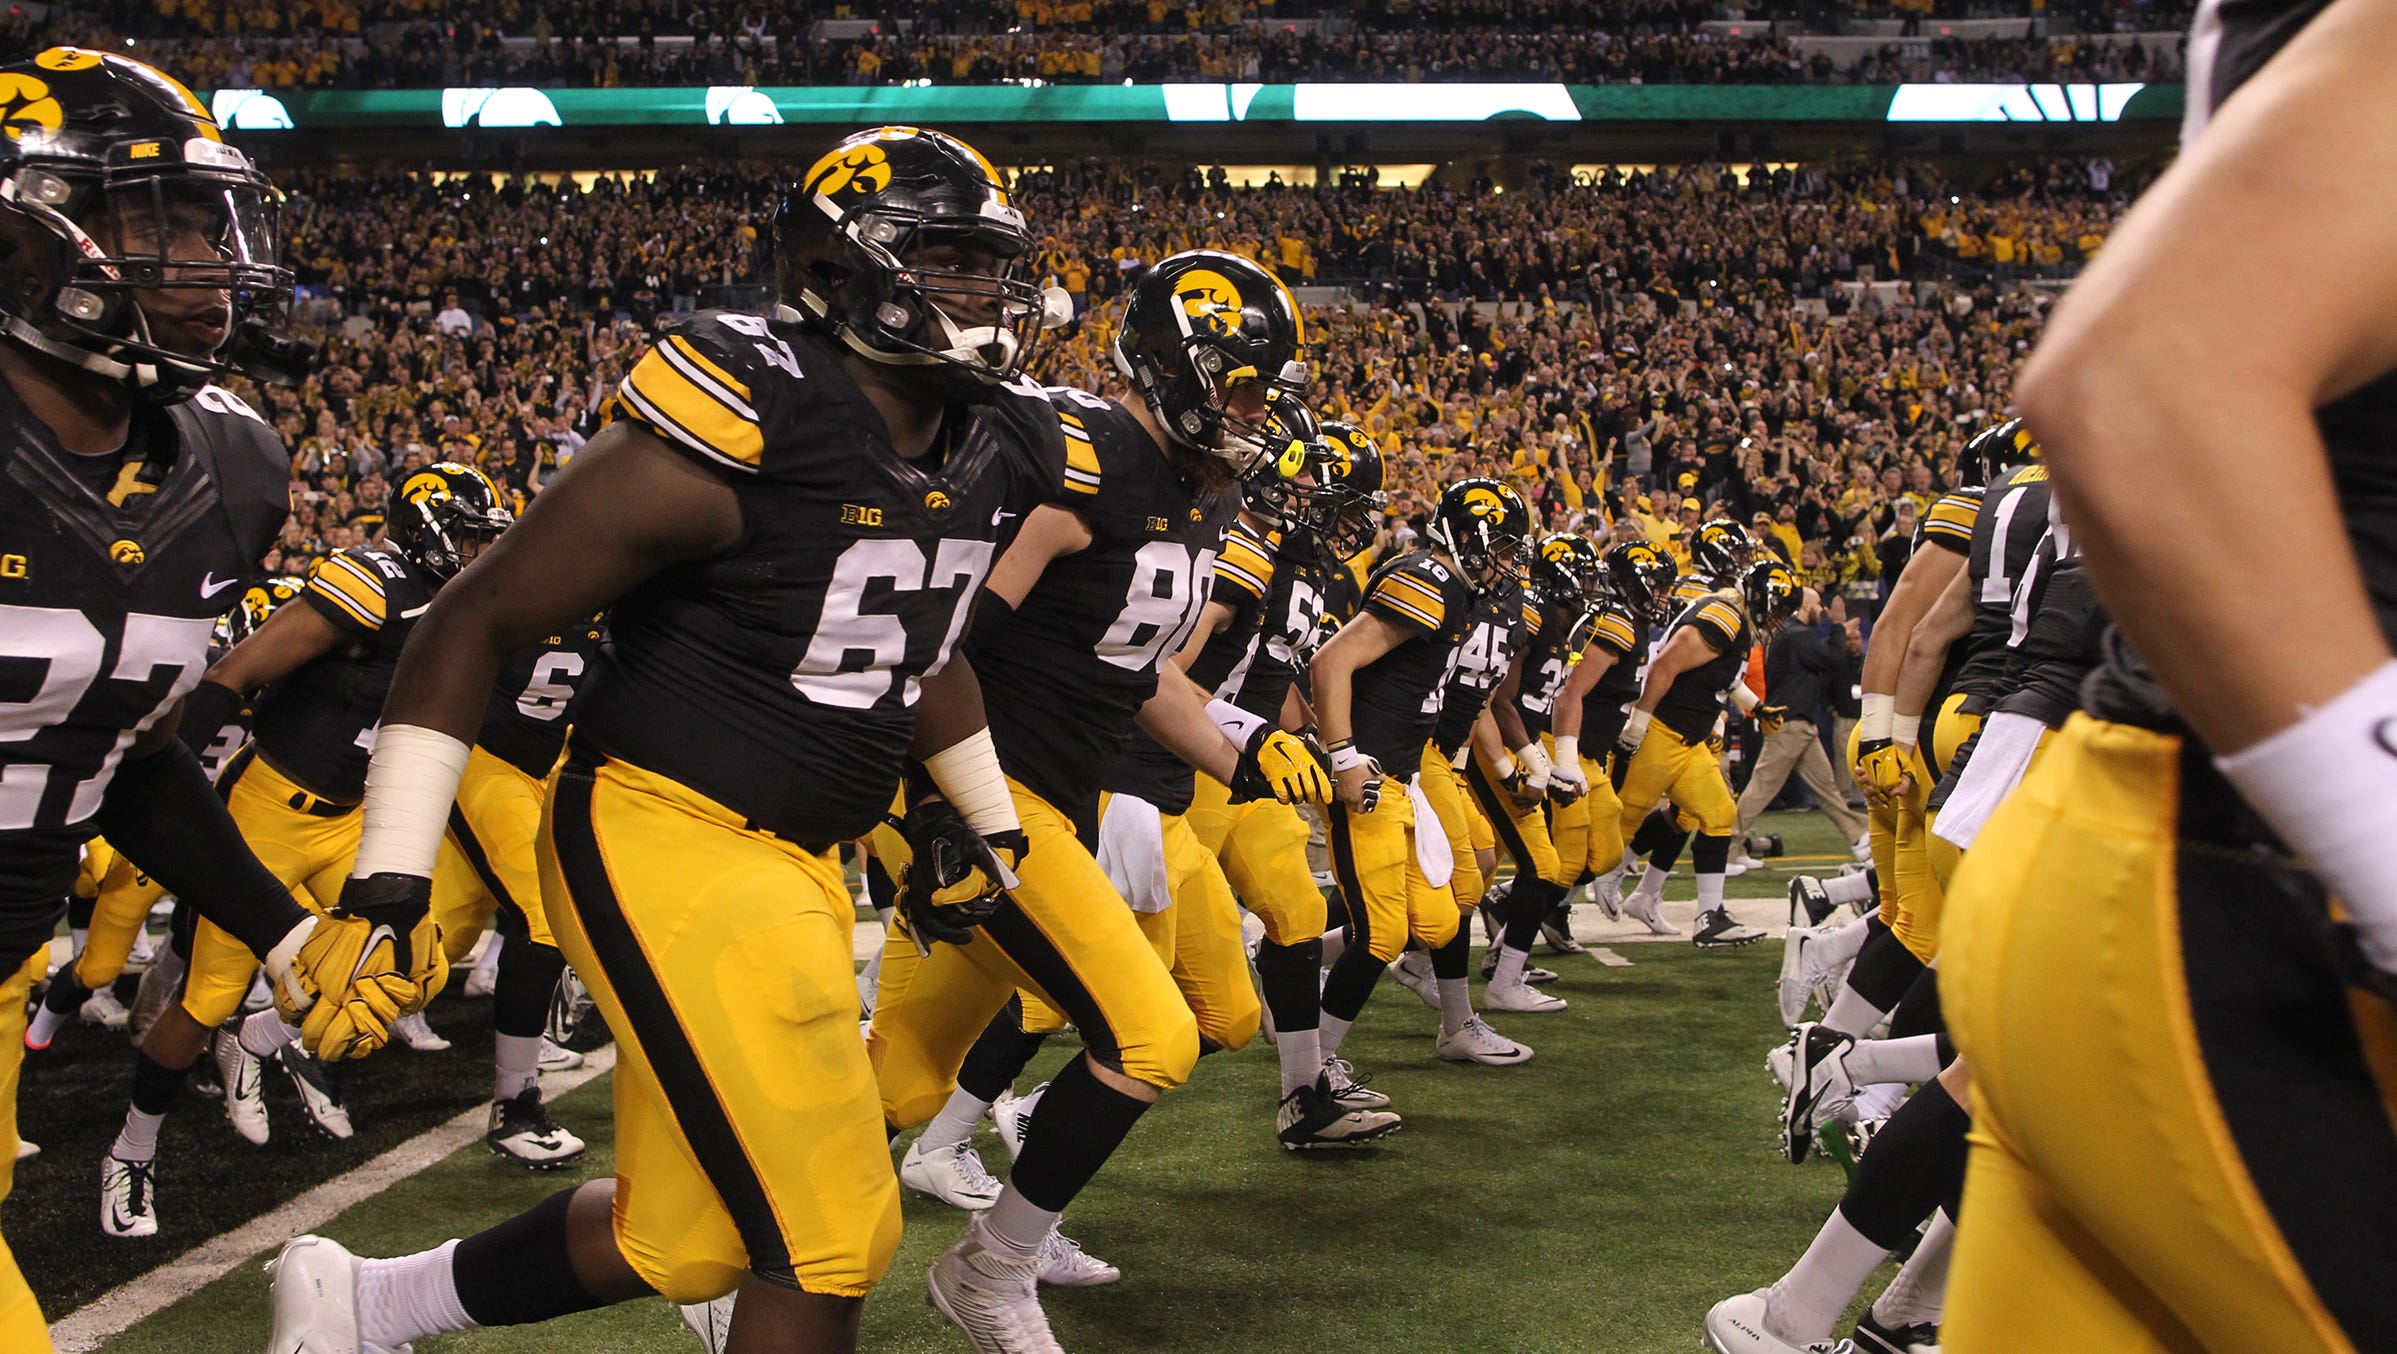 Iowa takes the field for the Big Ten Championship game against Michigan State at Lucas Oil Stadium in Indianapolis, Ind. on Saturday, Dec. 5, 2015.